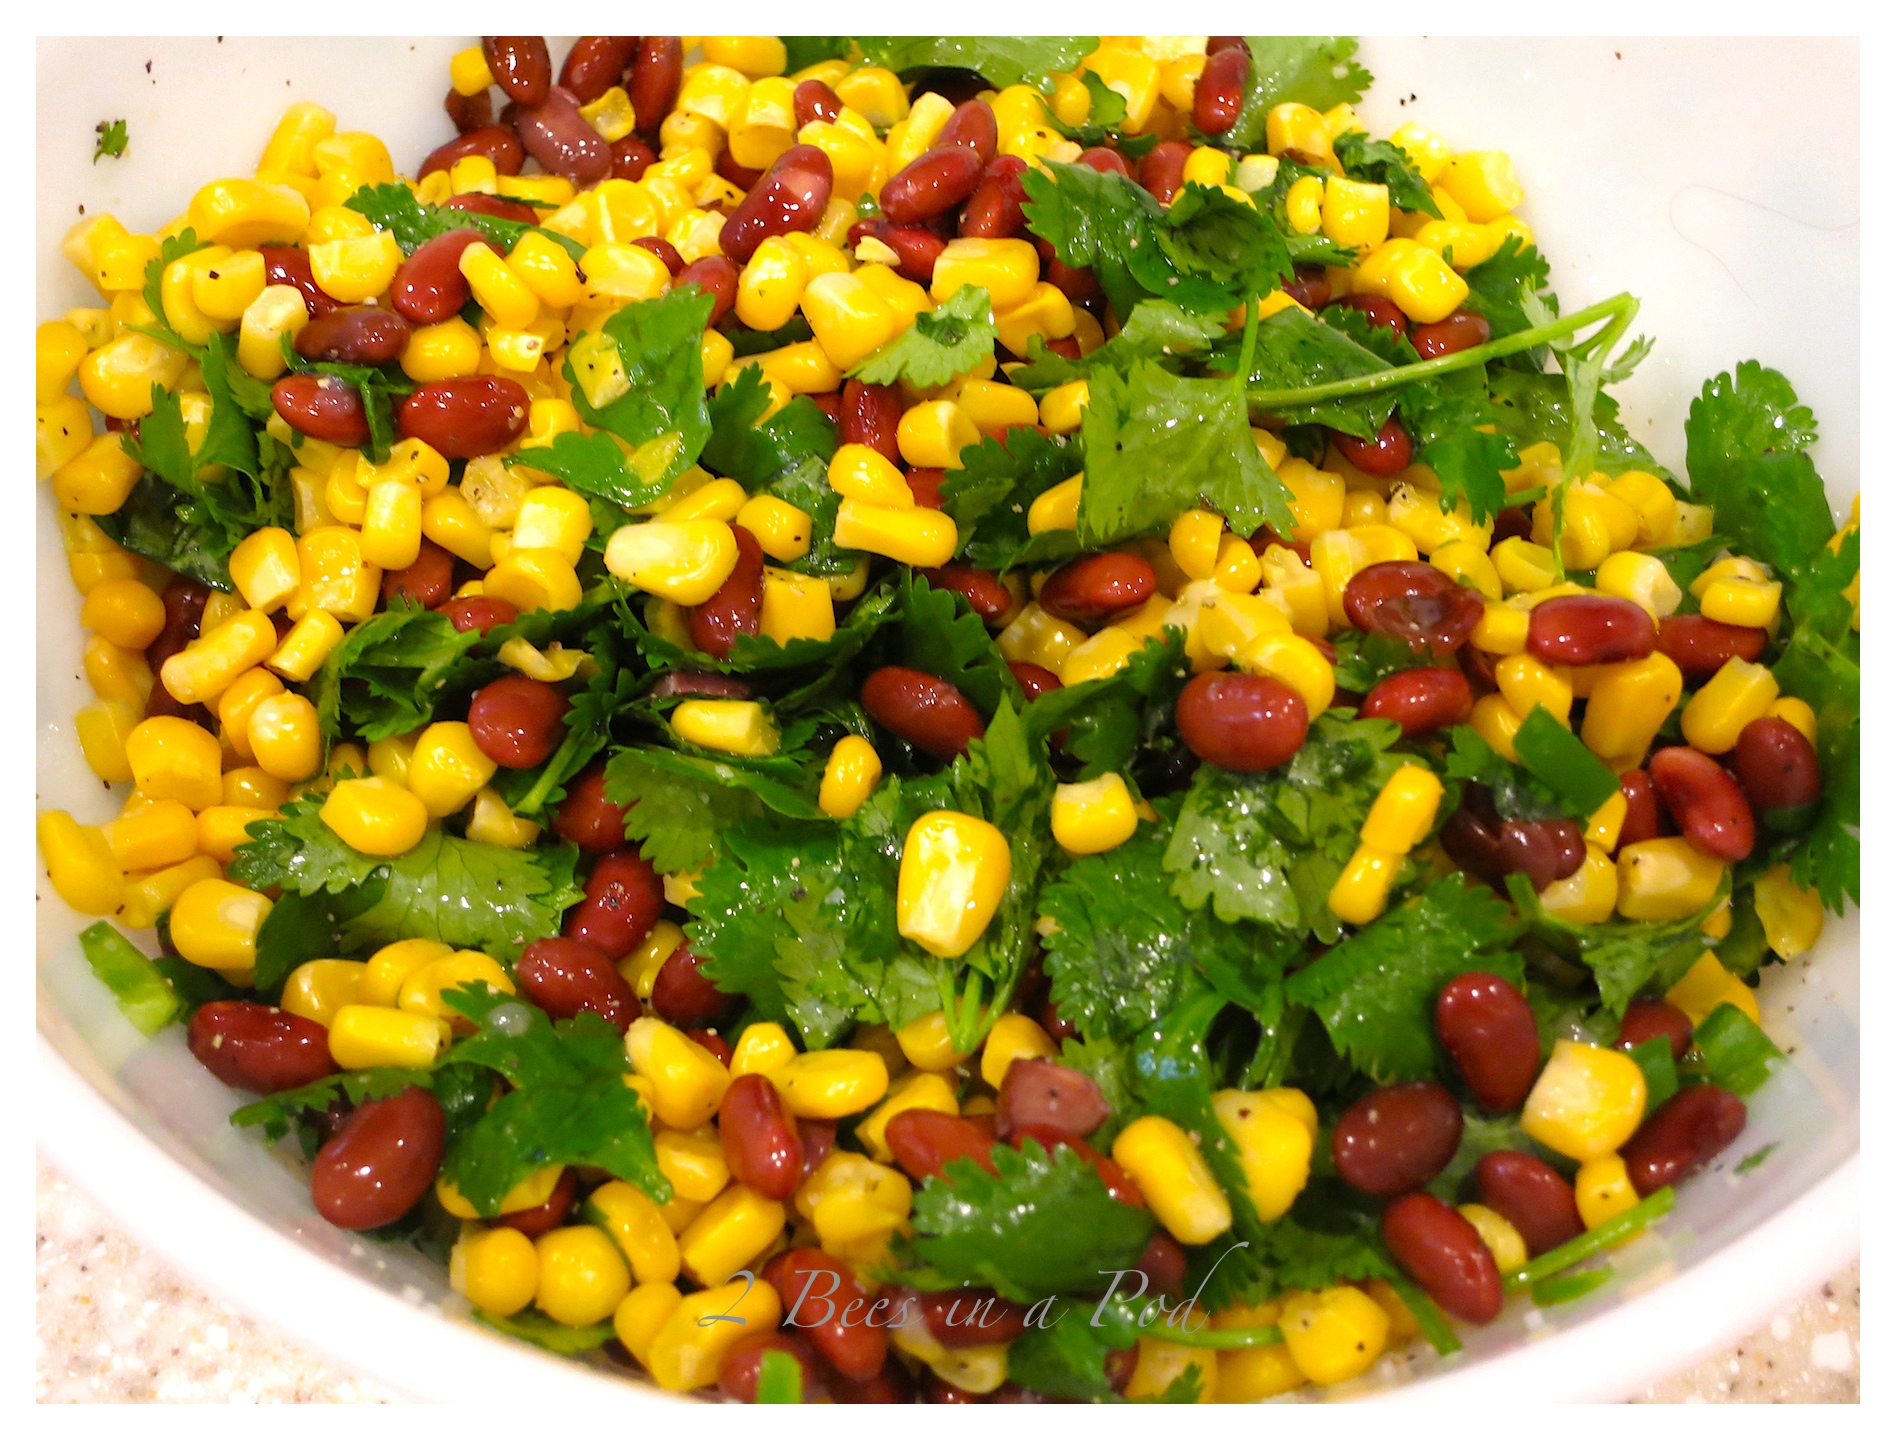 Black bean, corn and avocado salad.  Very flavorful with the addition of fresh lime juice, jalapeño and cilantro. Great as a main meal or side dish!